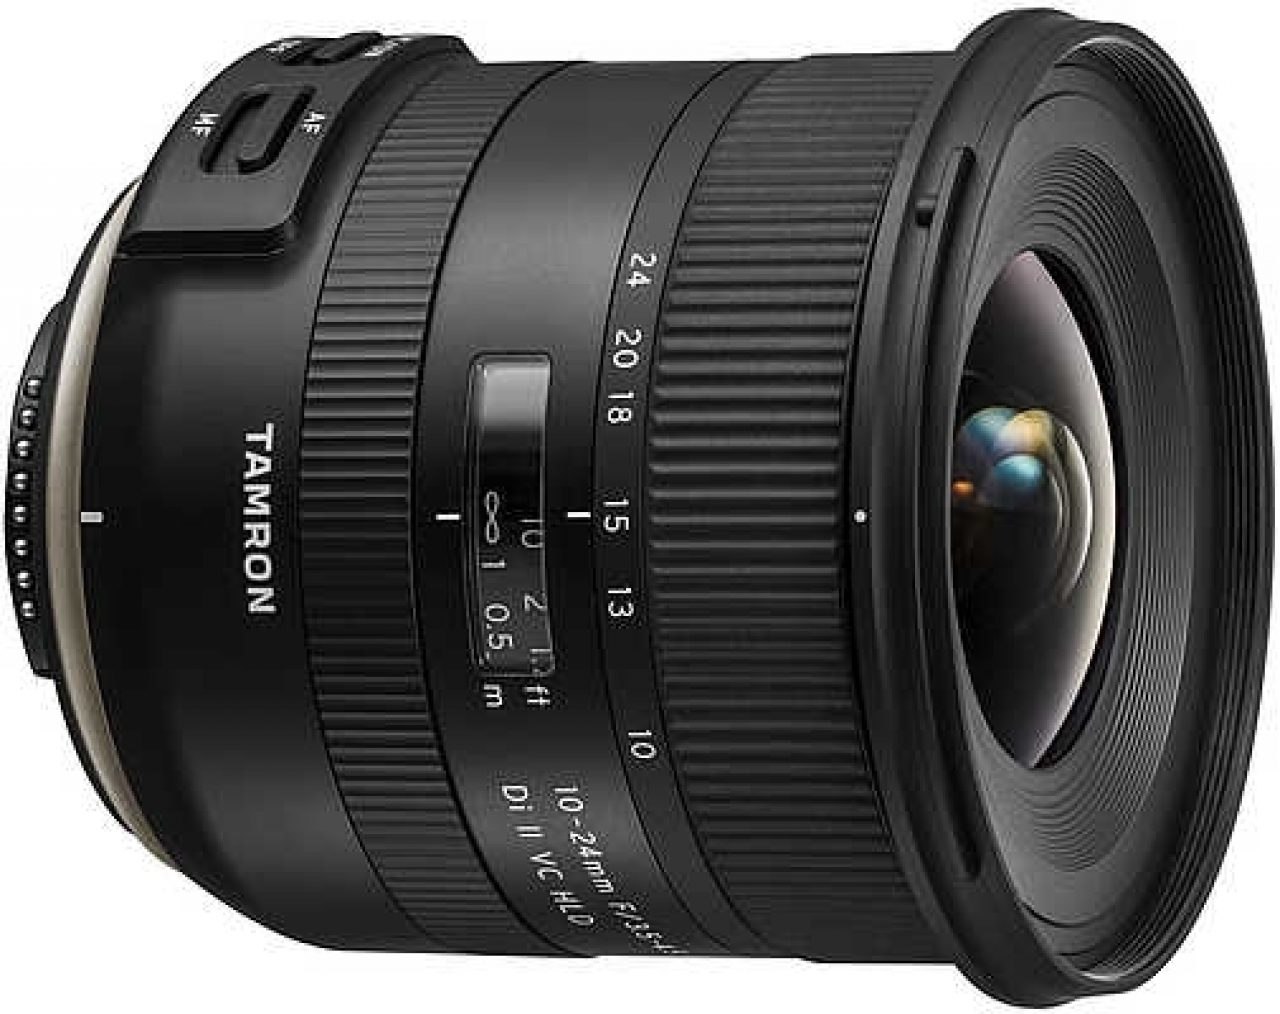 Tamron 10-24mm f/3.5-4.5 Di II VC HLD Review | Photography Blog